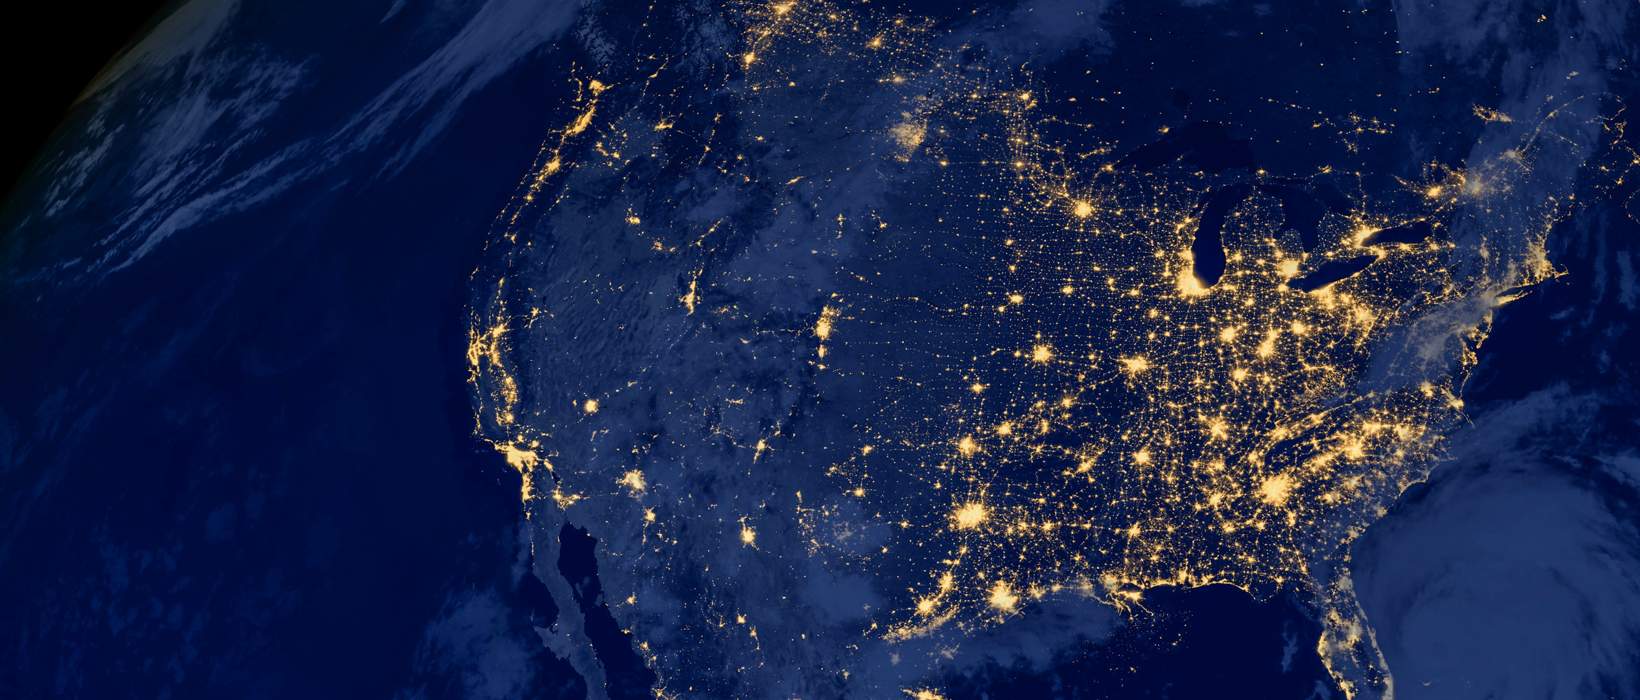 View of the United States from space at night